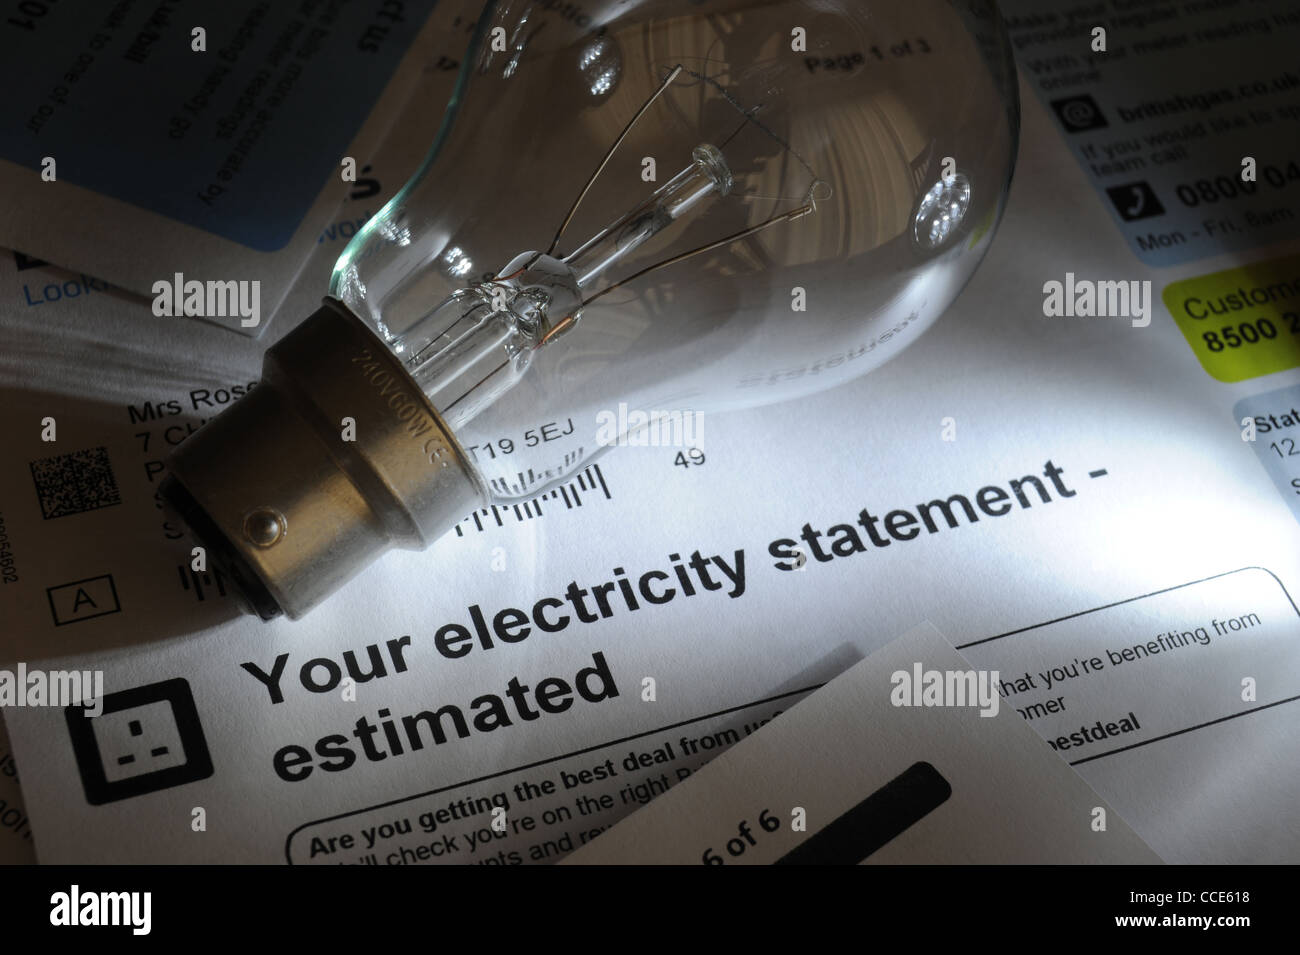 ELECTRICITY ESTIMATED BILL STATEMENT WITH LIGHT BULB RE RISING ENERGY COSTS FUEL GAS UTILITIES HEATING LIGHTING BUDGETS ETC UK Stock Photo